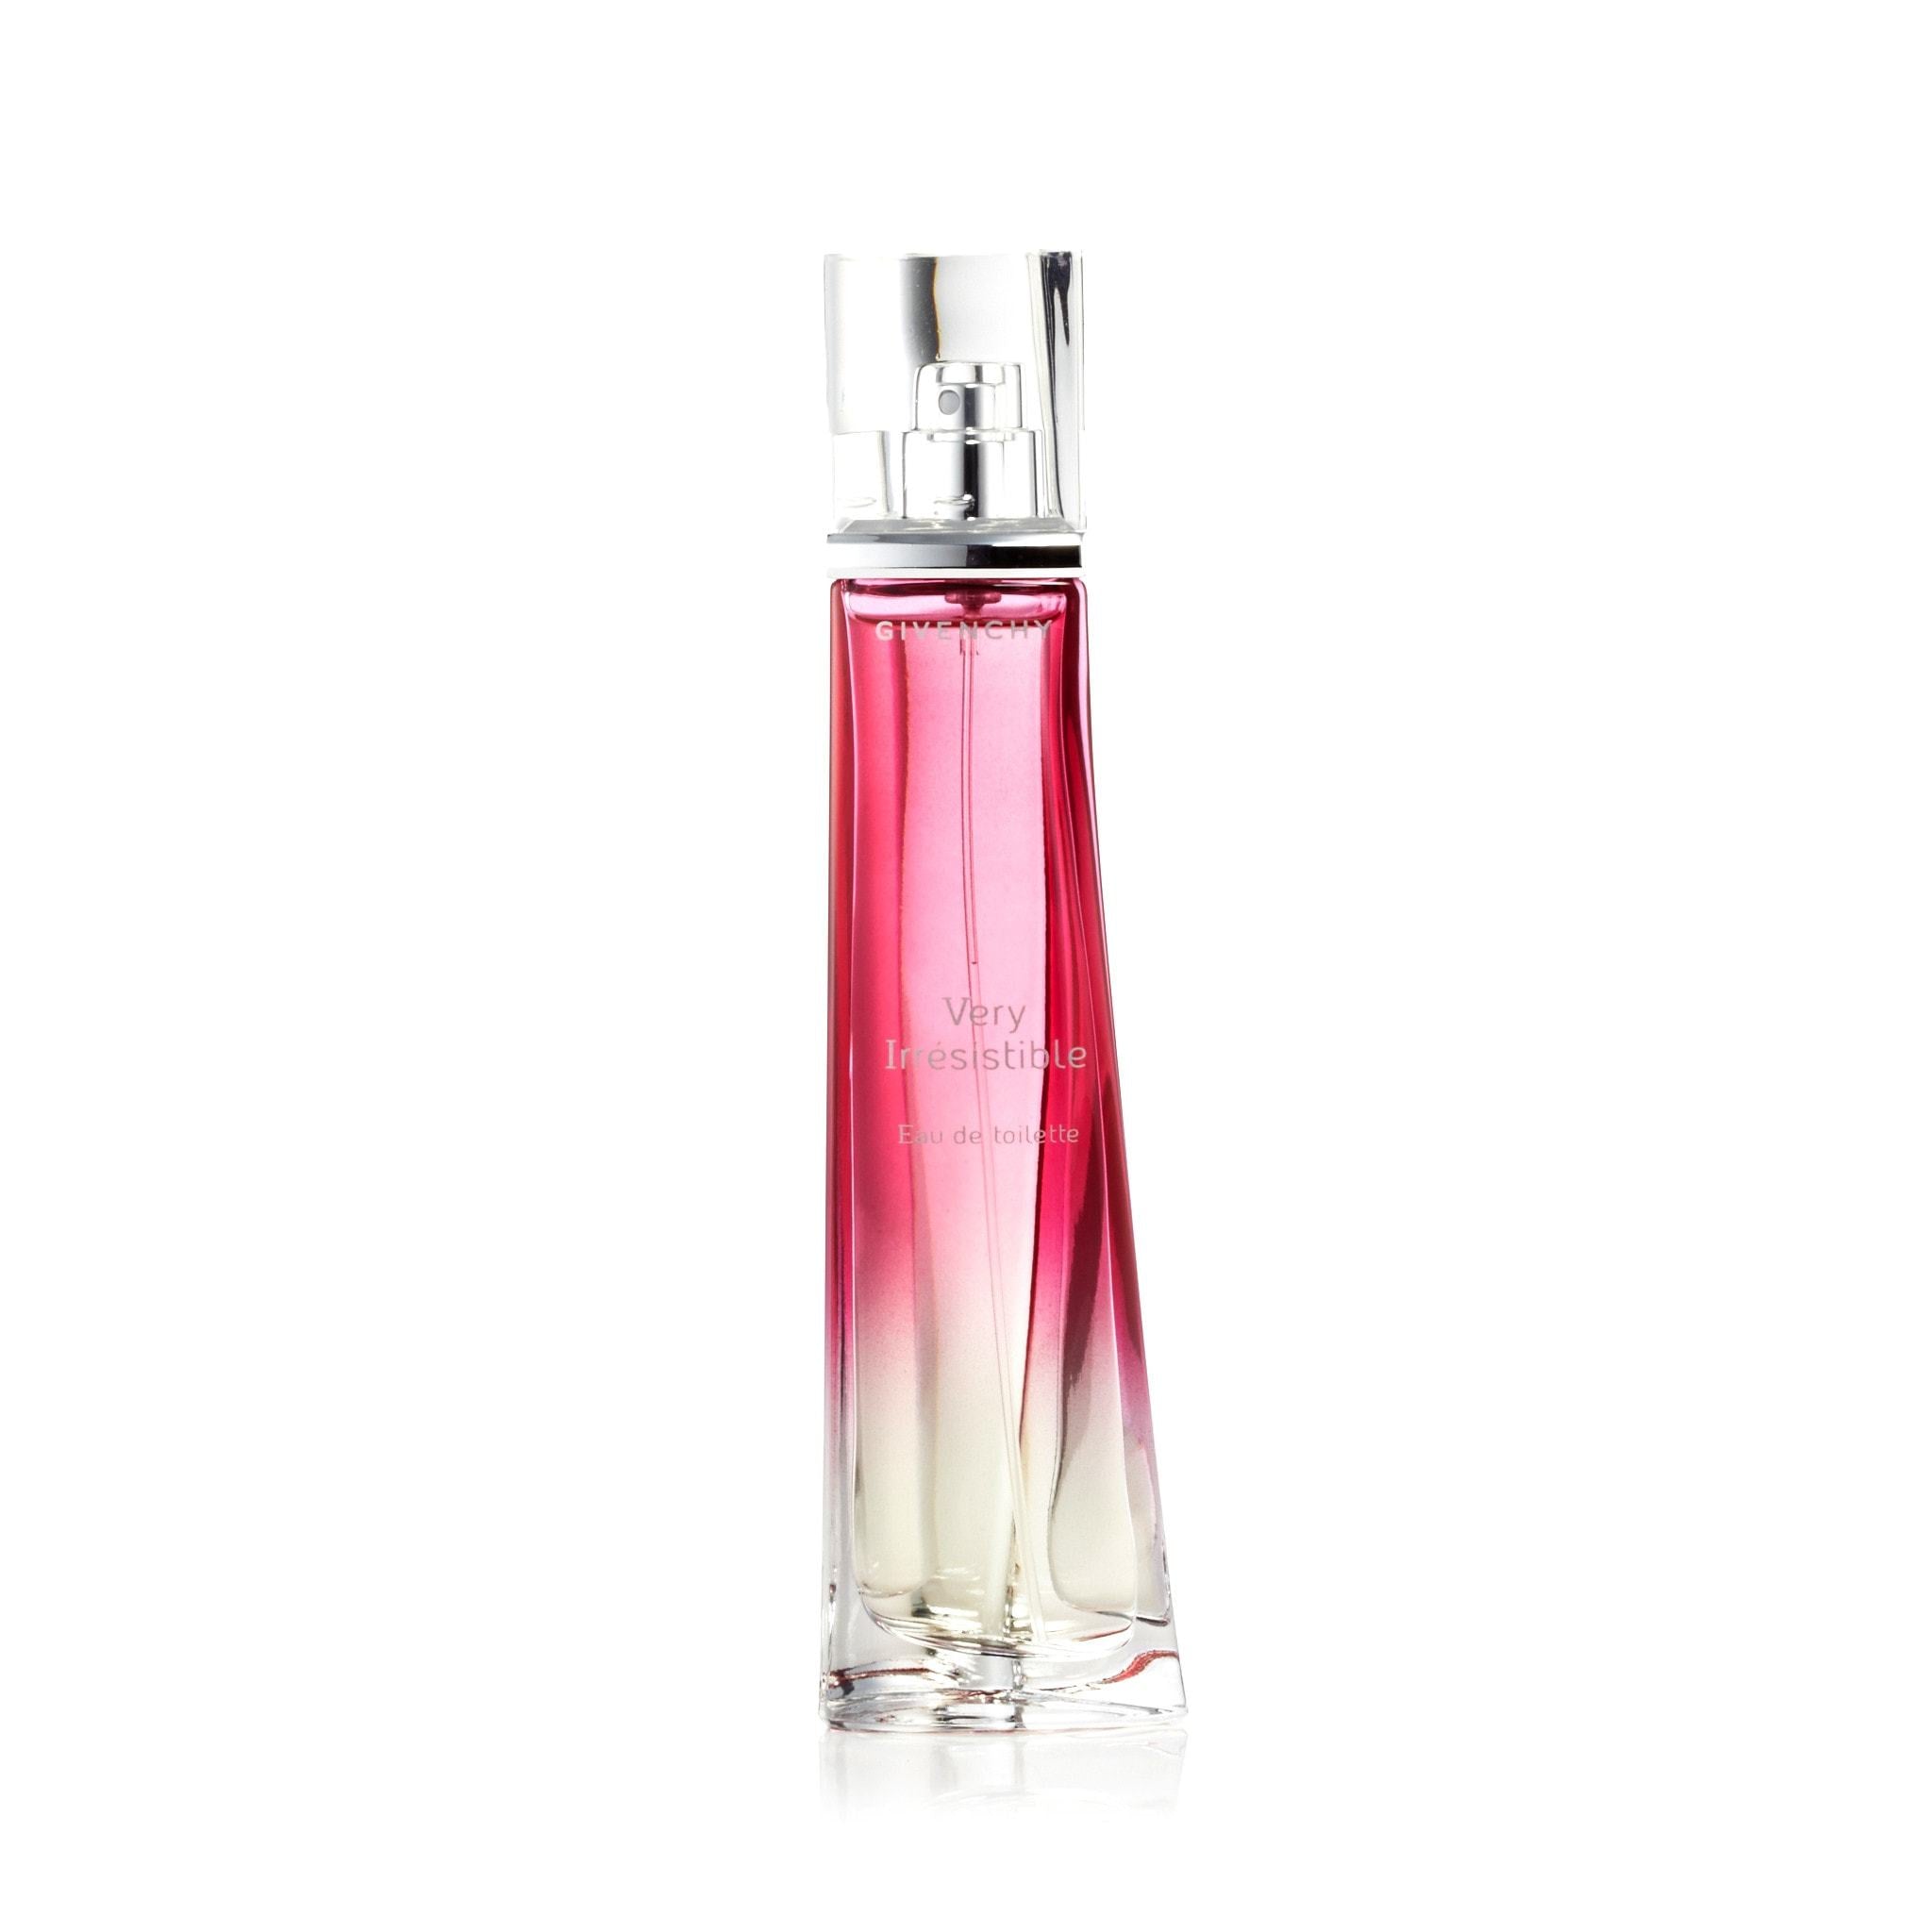 Very Irresistible for Women by Givenchy Iridescent Bath Gel 6.7 oz / 2 –  Cosmic-Perfume